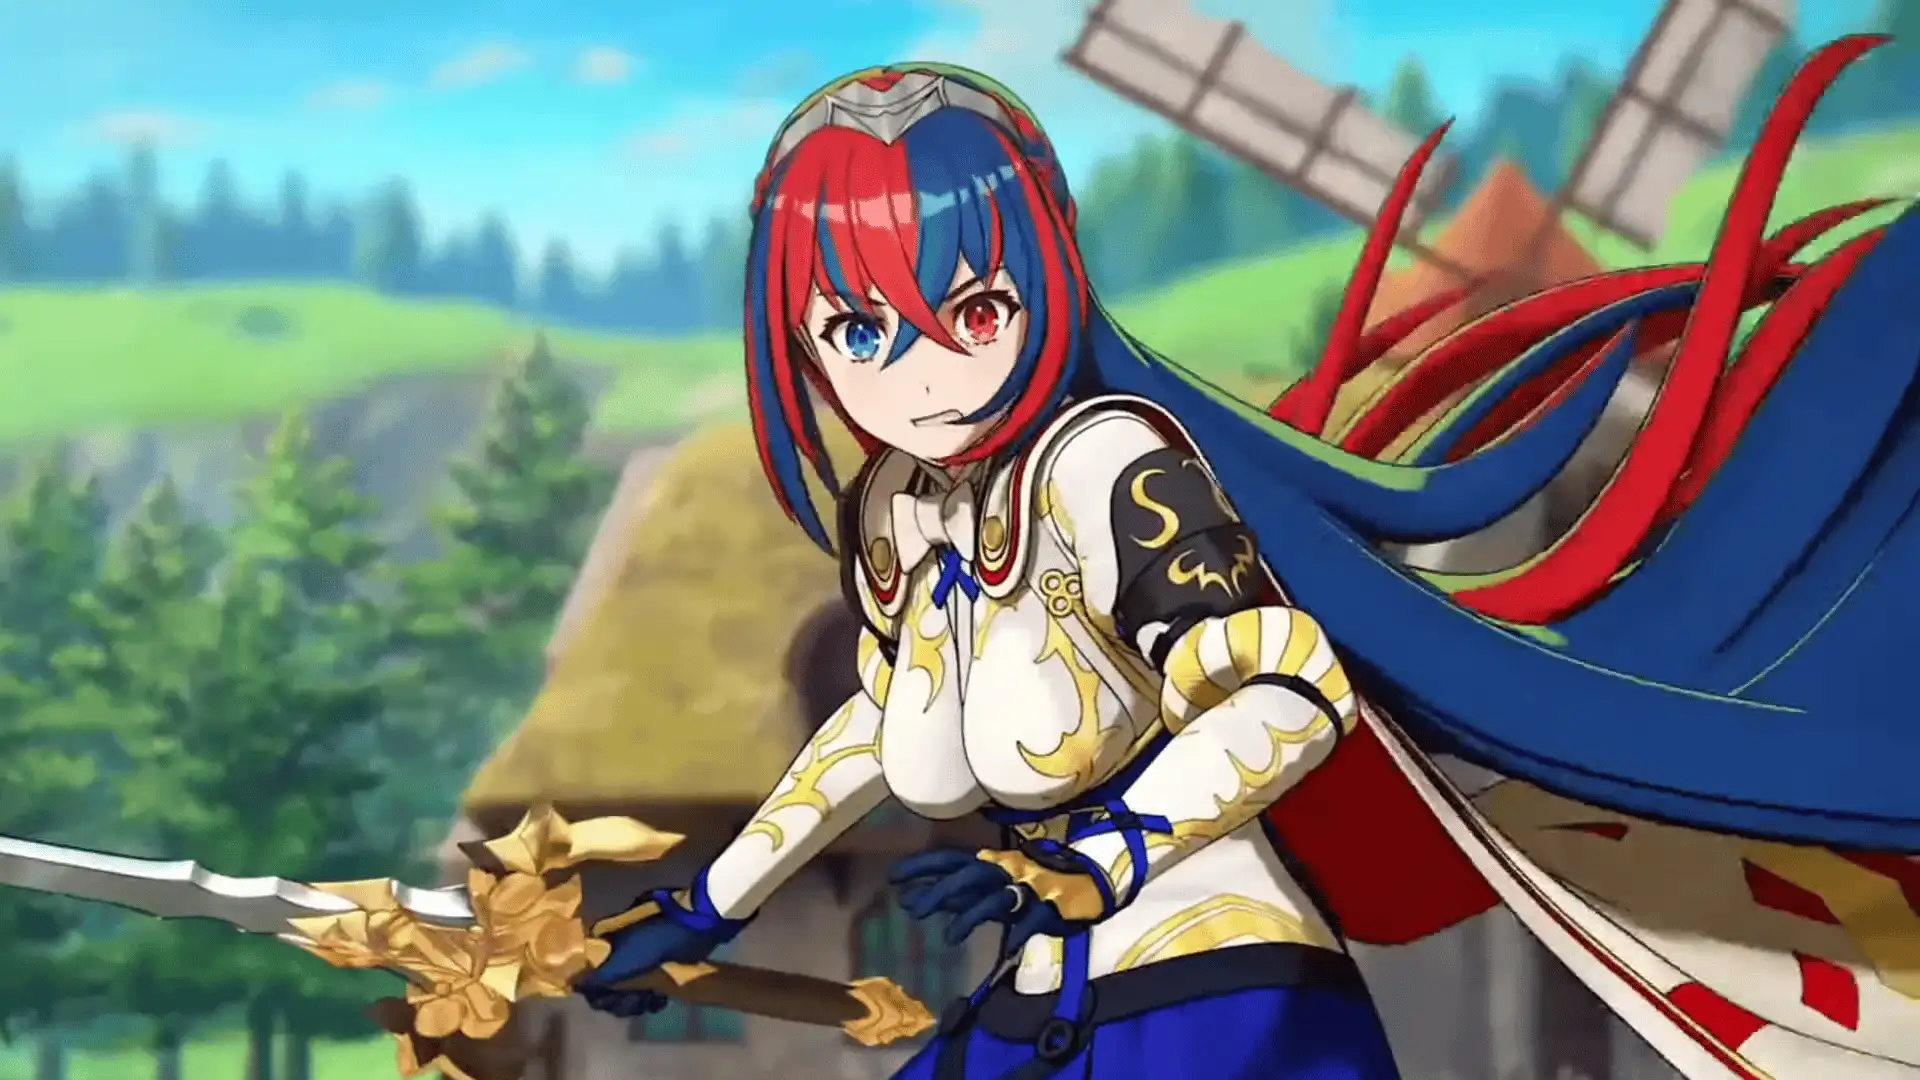 Fire Emblem Engage review: Not very engaging